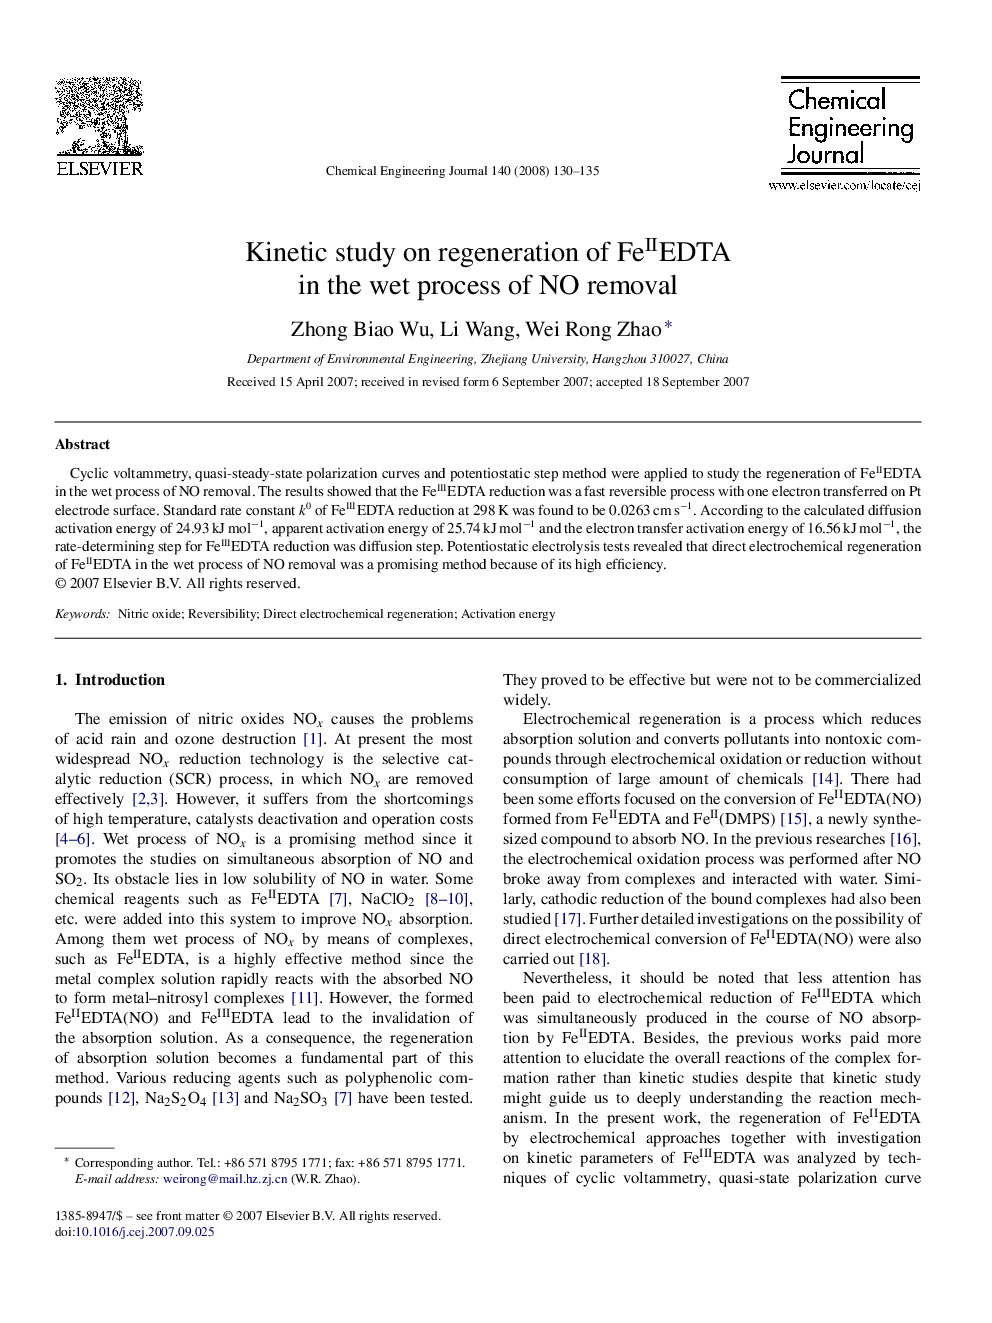 Kinetic study on regeneration of FeIIEDTA in the wet process of NO removal